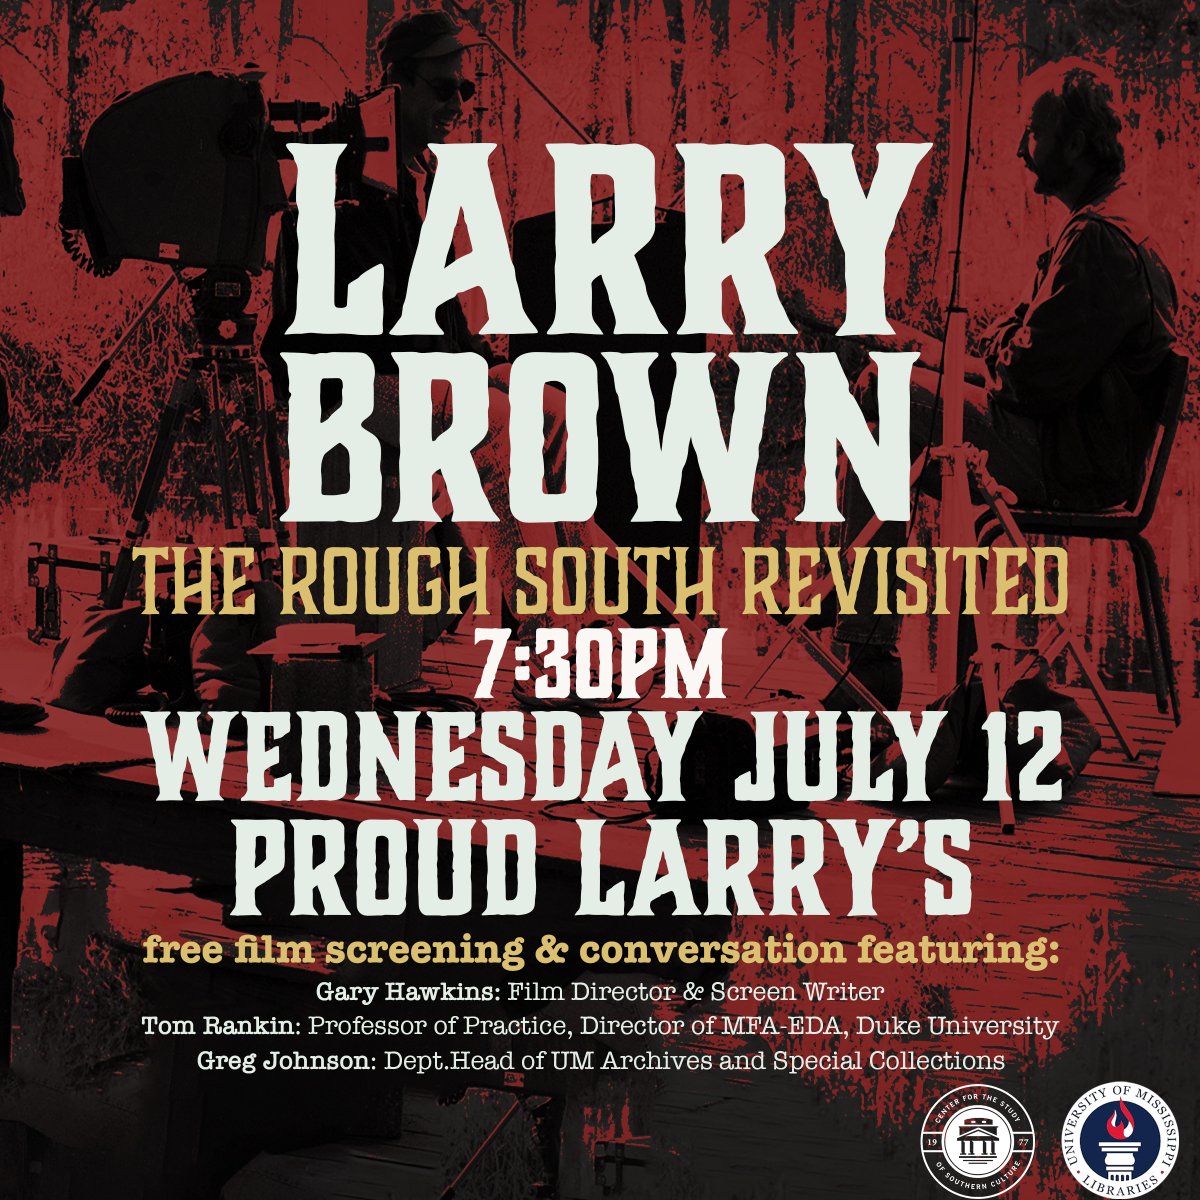 There will be a special free screening of 'The Rough South of Larry Brown' at 7:30 p.m. Wednesday, July 12 @proudlarrys. The program will include rarely seen photos & clips not in the original film. Sponsored by @SouthernStudies & @UMLibraries